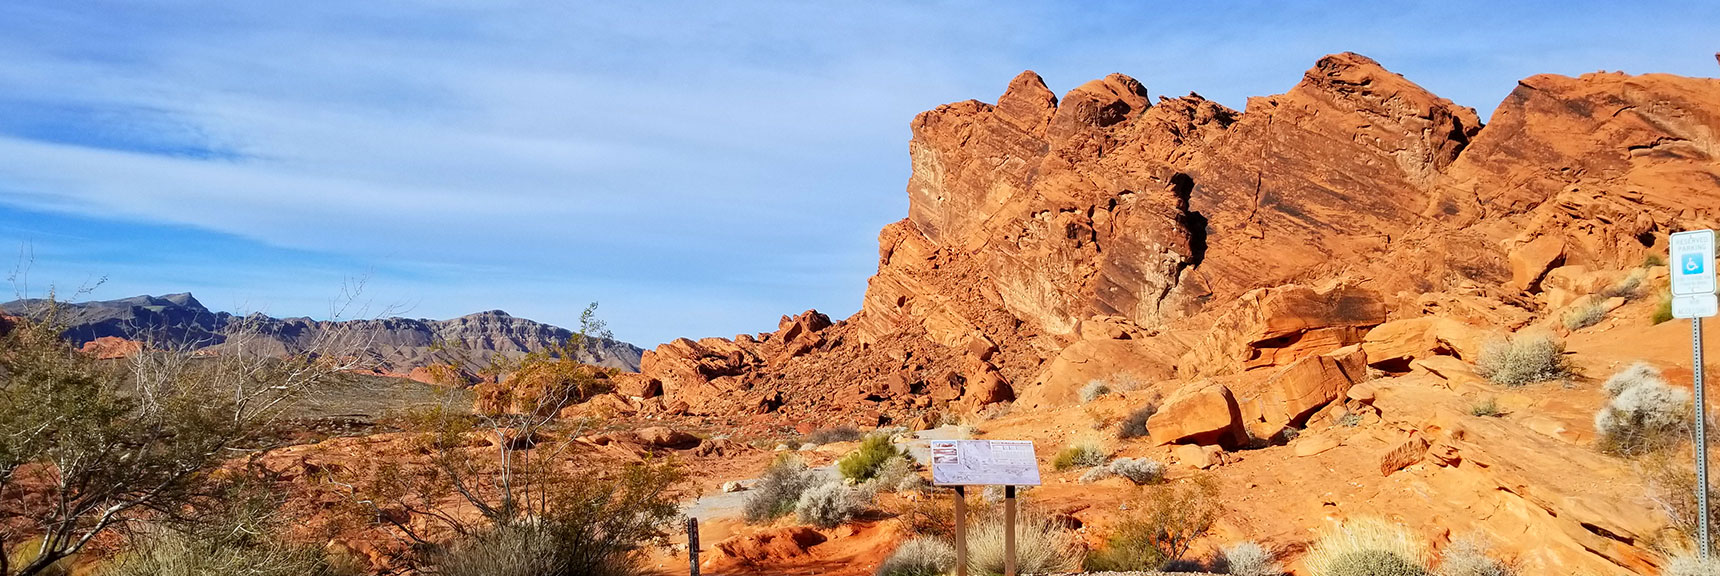 Balancing Rock Trailhead in Valley of Fire State Park, Nevada